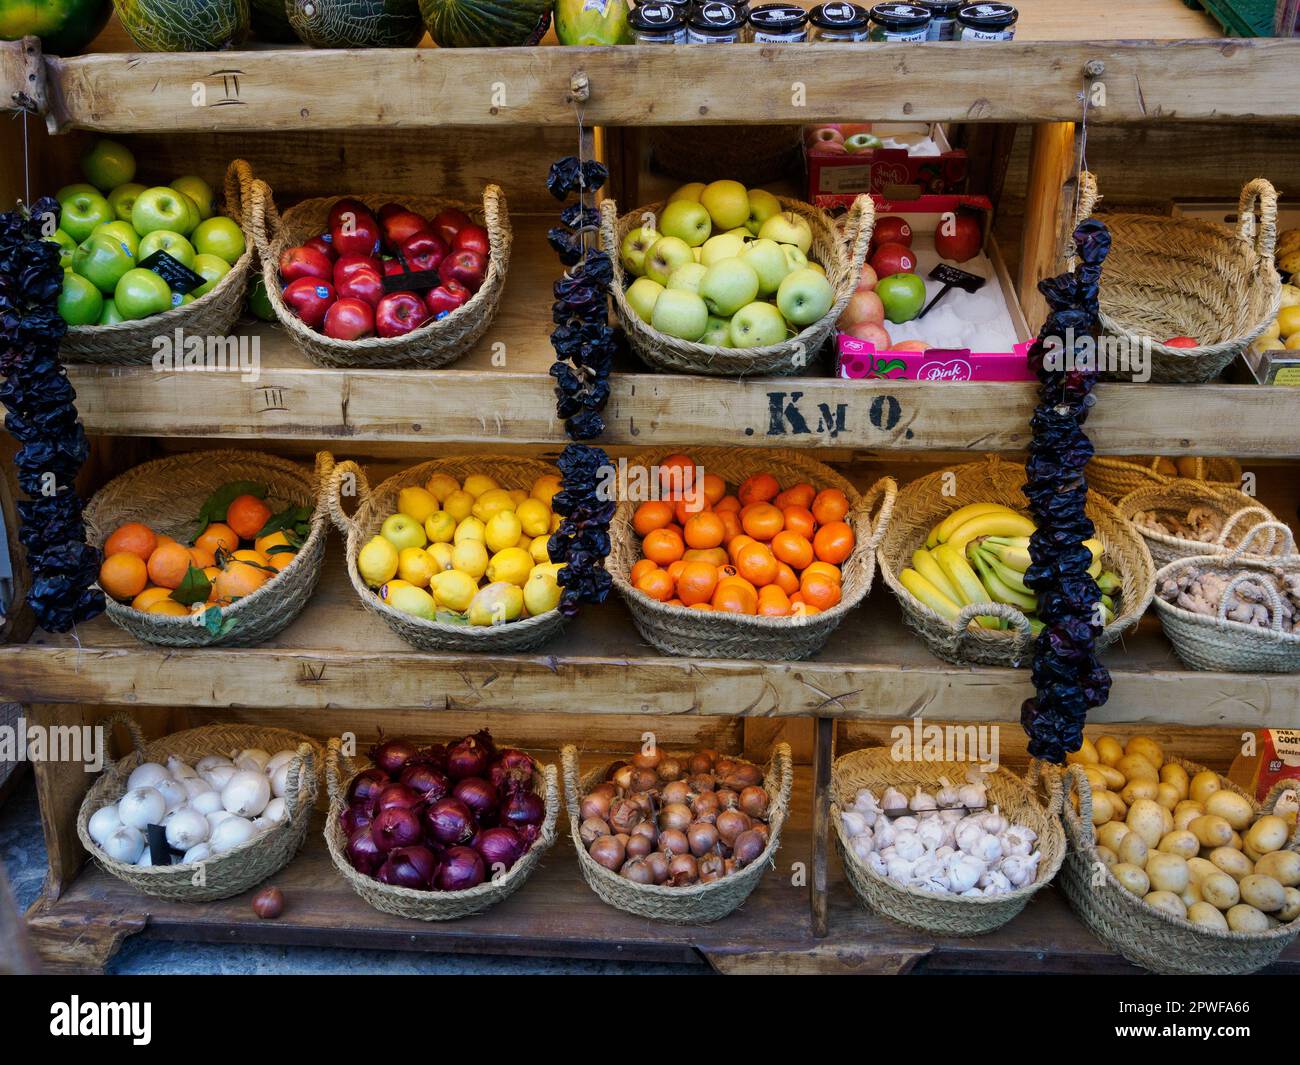 Fruit and veg displayed in attractive baskets outside a village store in Majorca Spain Stock Photo